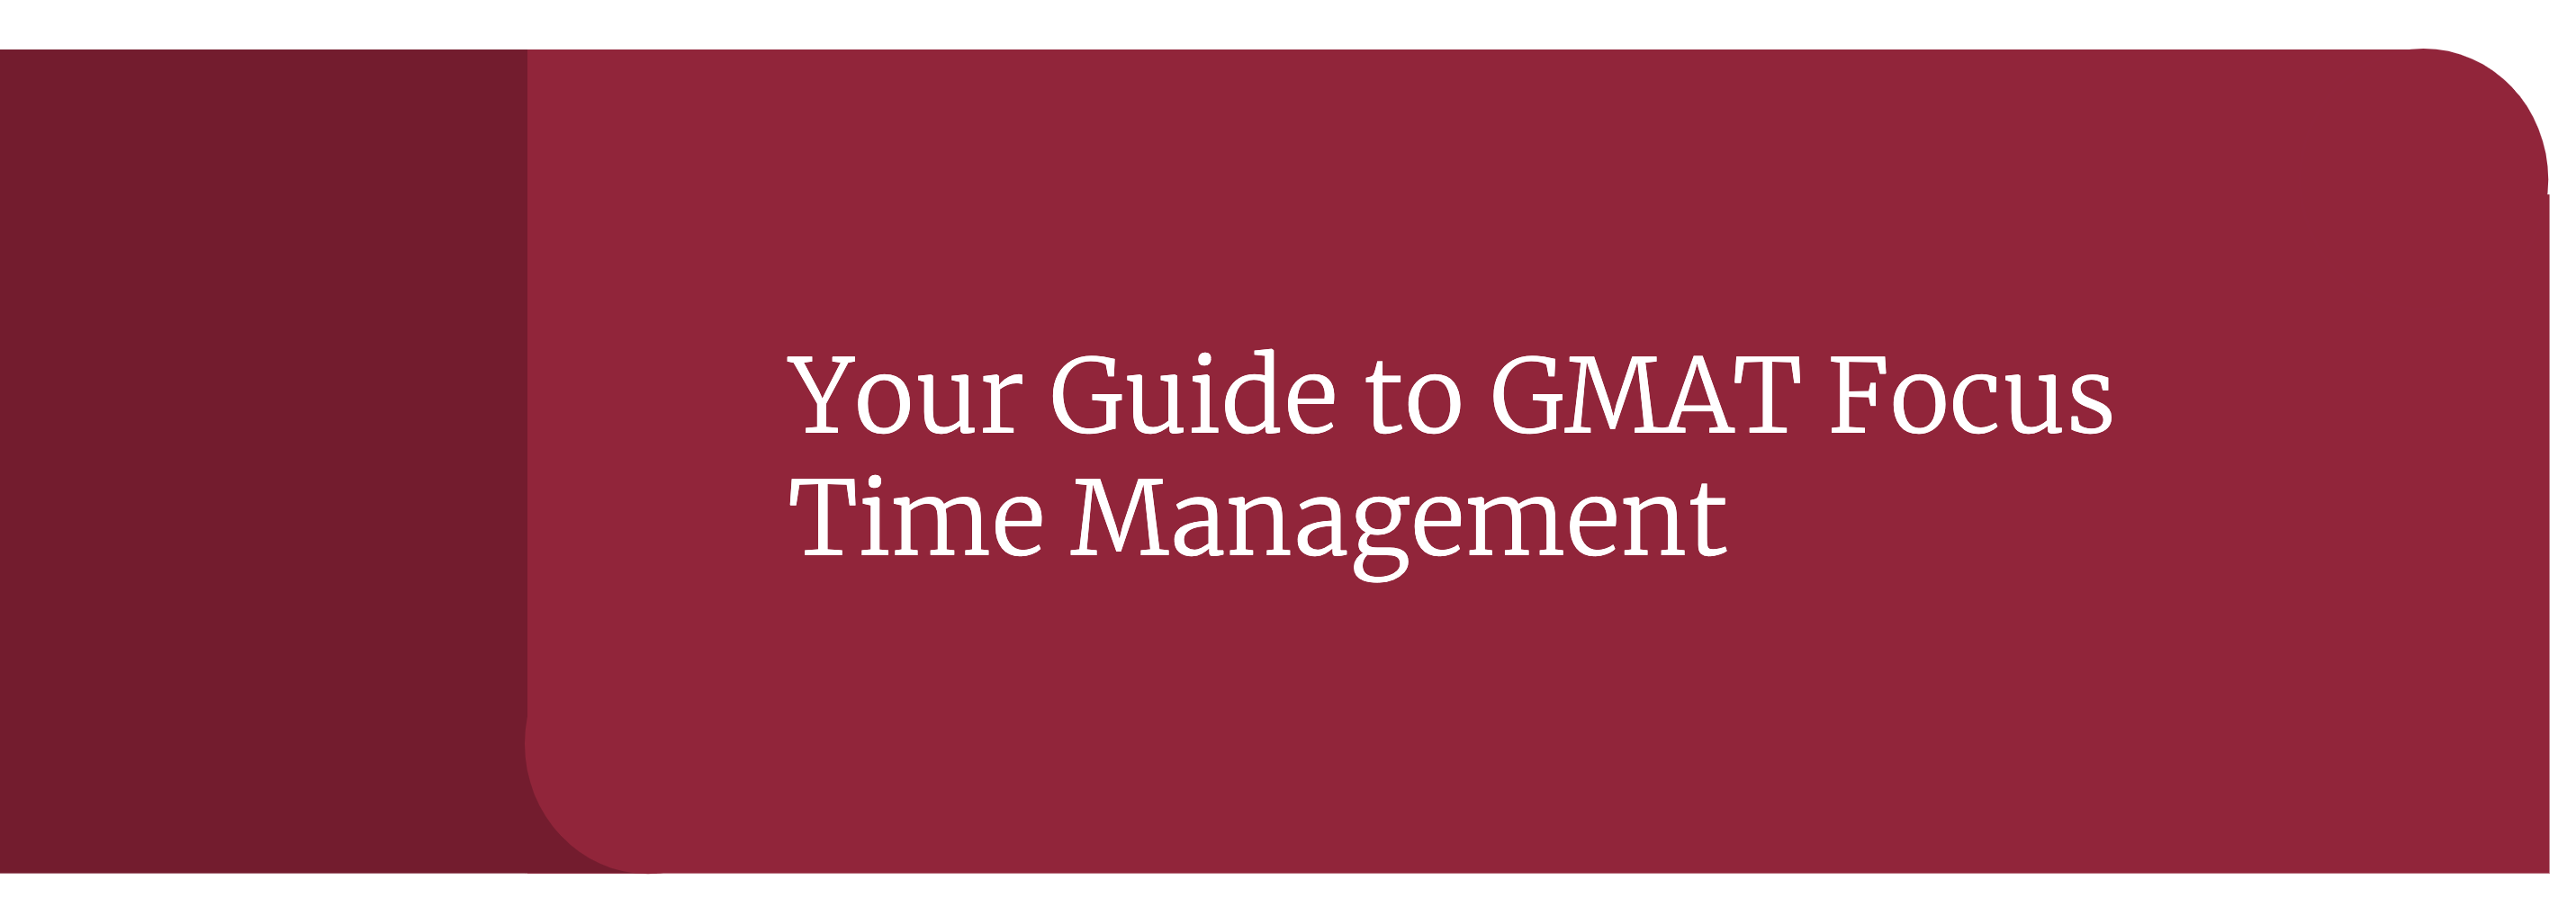 Your Guide to GMAT Focus Time Management